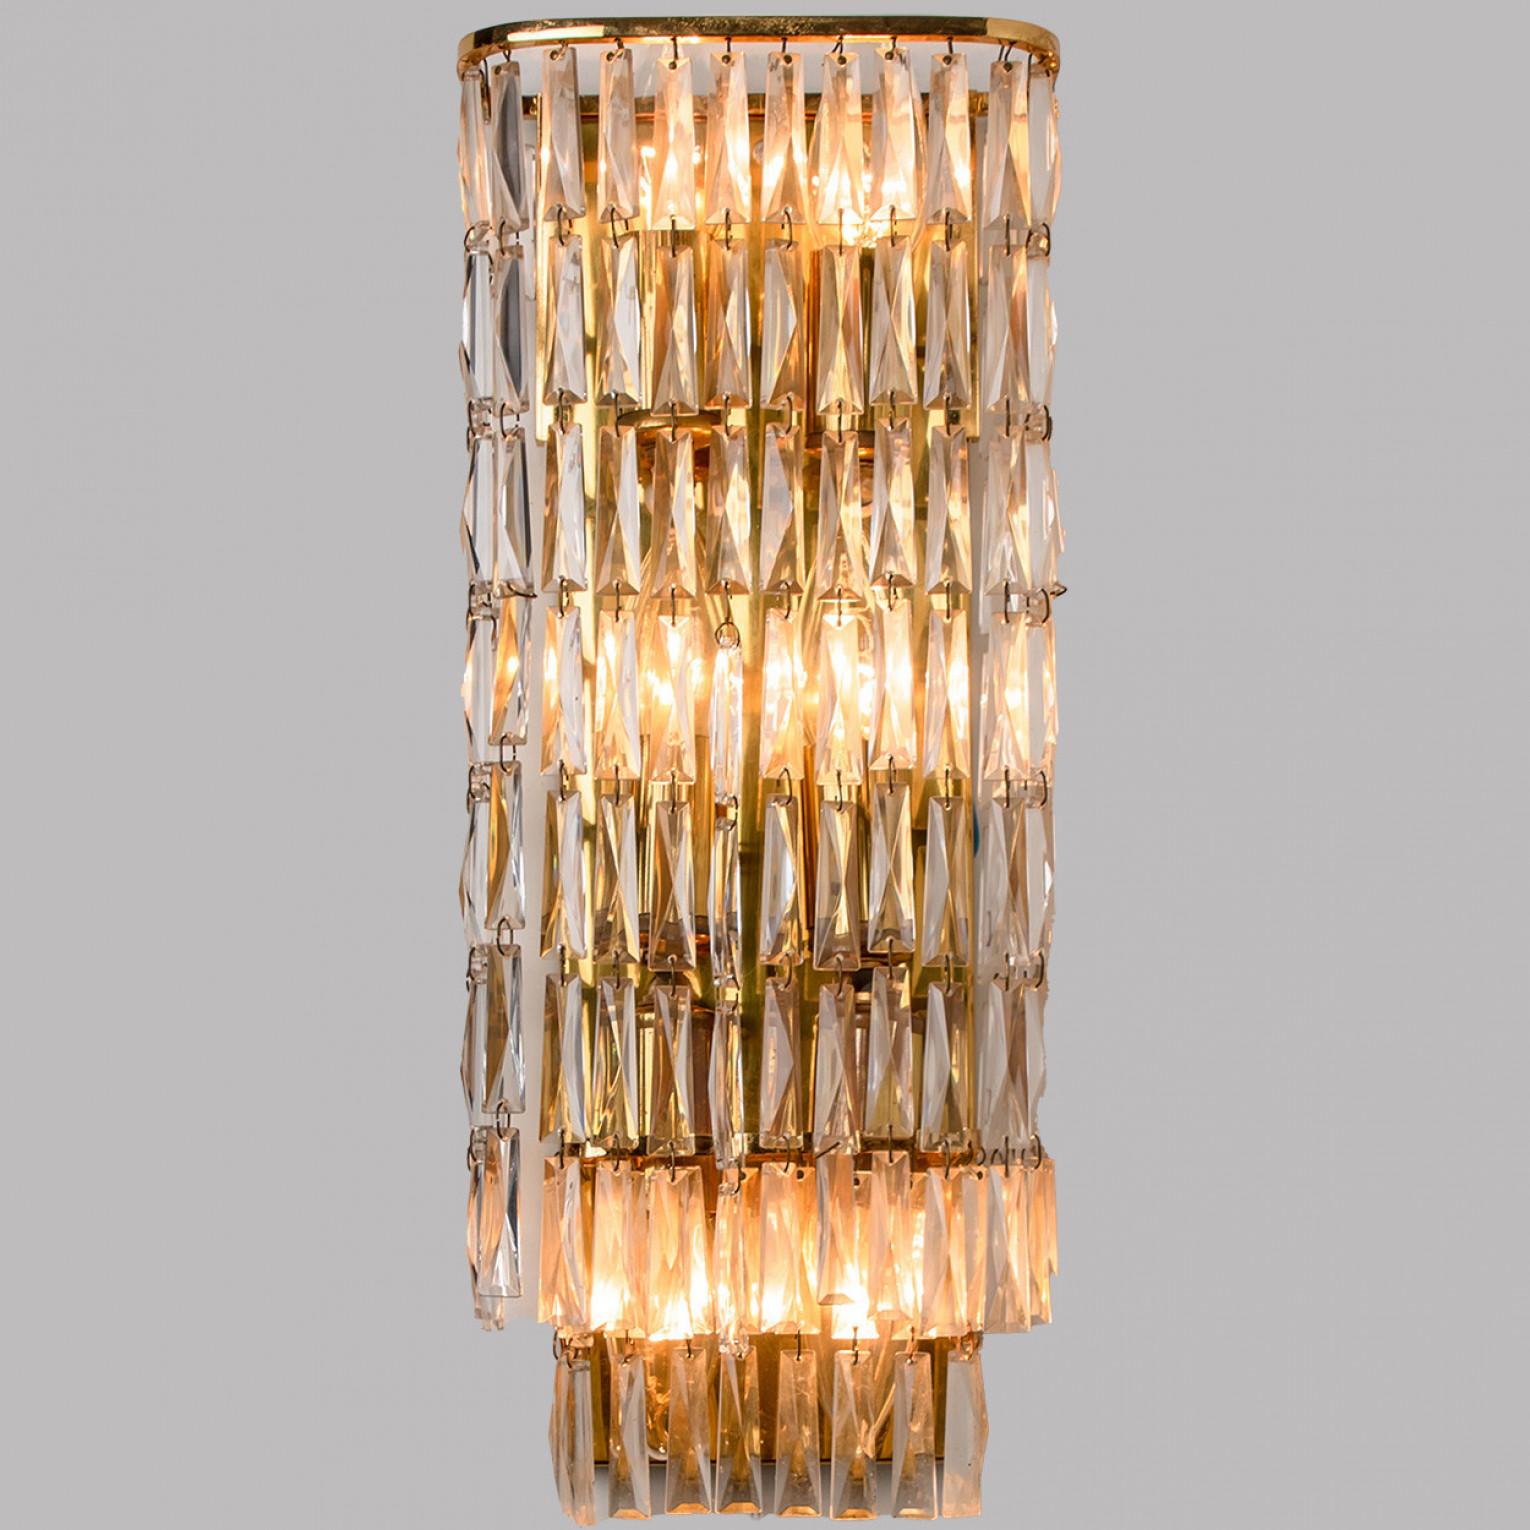 1 of the 6 Clear Gold, Glass Messing Crystal Wall Lights, Bakalowits, 1970 For Sale 4